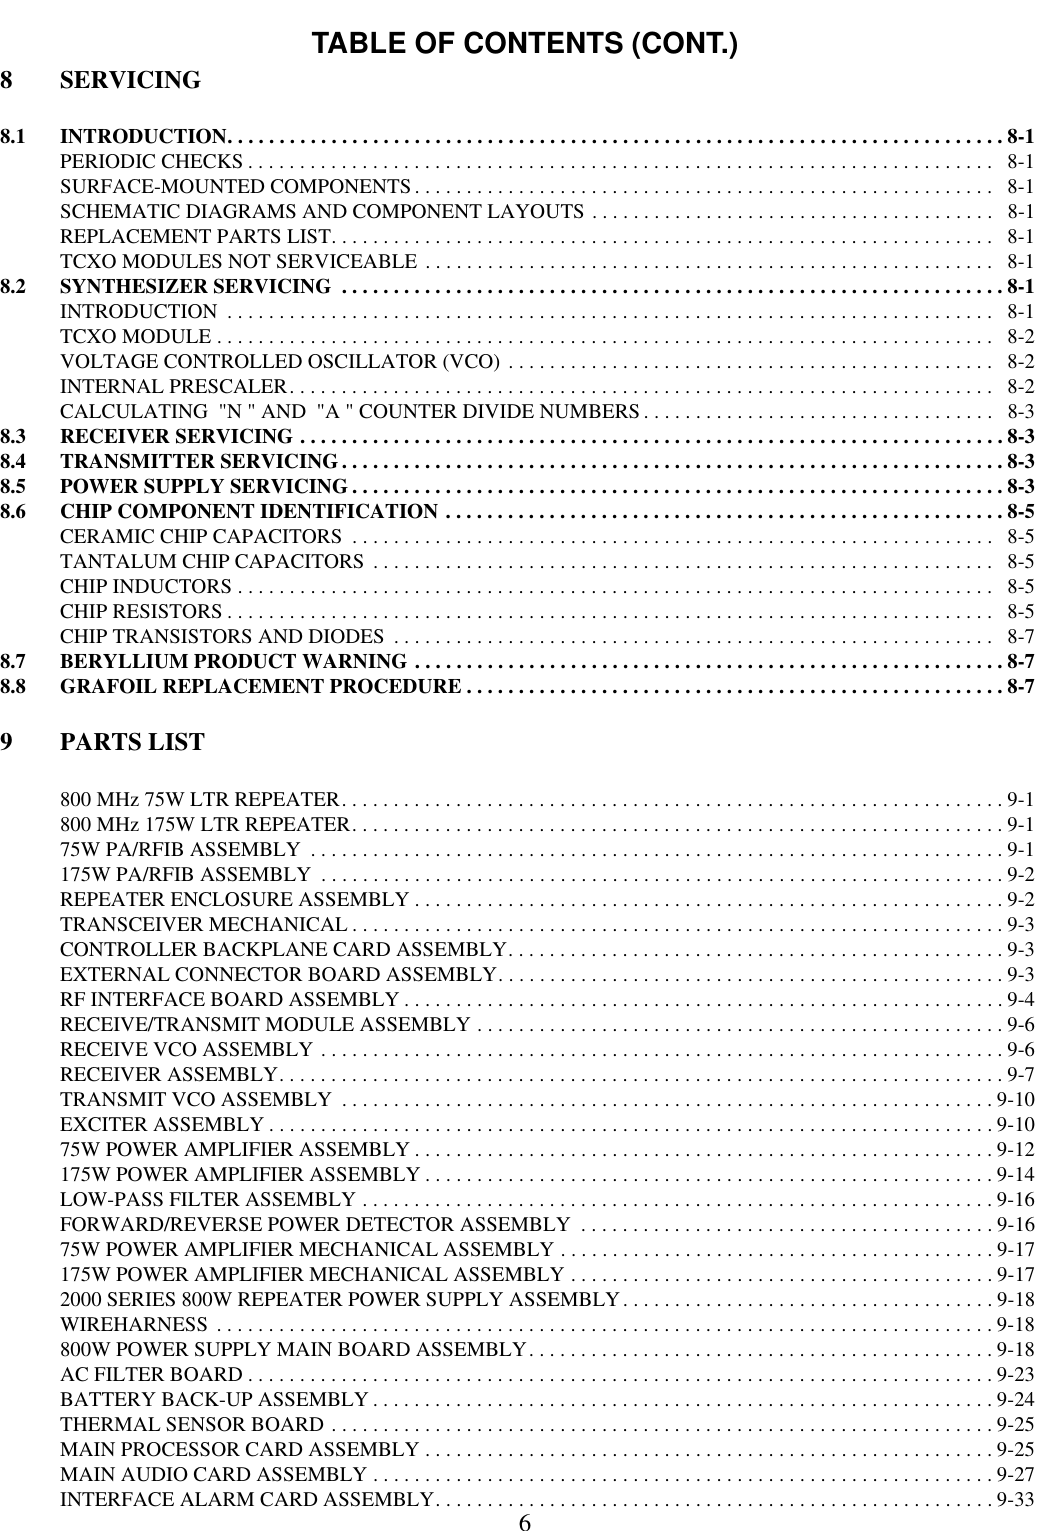 TABLE OF CONTENTS (CONT.)68 SERVICING8.1 INTRODUCTION. . . . . . . . . . . . . . . . . . . . . . . . . . . . . . . . . . . . . . . . . . . . . . . . . . . . . . . . . . . . . . . . . . . . . . . . . . . 8-1PERIODIC CHECKS . . . . . . . . . . . . . . . . . . . . . . . . . . . . . . . . . . . . . . . . . . . . . . . . . . . . . . . . . . . . . . . . . . . . . . . .   8-1SURFACE-MOUNTED COMPONENTS. . . . . . . . . . . . . . . . . . . . . . . . . . . . . . . . . . . . . . . . . . . . . . . . . . . . . . . .   8-1SCHEMATIC DIAGRAMS AND COMPONENT LAYOUTS . . . . . . . . . . . . . . . . . . . . . . . . . . . . . . . . . . . . . . .   8-1REPLACEMENT PARTS LIST. . . . . . . . . . . . . . . . . . . . . . . . . . . . . . . . . . . . . . . . . . . . . . . . . . . . . . . . . . . . . . . .   8-1TCXO MODULES NOT SERVICEABLE . . . . . . . . . . . . . . . . . . . . . . . . . . . . . . . . . . . . . . . . . . . . . . . . . . . . . . .   8-18.2 SYNTHESIZER SERVICING  . . . . . . . . . . . . . . . . . . . . . . . . . . . . . . . . . . . . . . . . . . . . . . . . . . . . . . . . . . . . . . . . 8-1INTRODUCTION  . . . . . . . . . . . . . . . . . . . . . . . . . . . . . . . . . . . . . . . . . . . . . . . . . . . . . . . . . . . . . . . . . . . . . . . . . .   8-1TCXO MODULE . . . . . . . . . . . . . . . . . . . . . . . . . . . . . . . . . . . . . . . . . . . . . . . . . . . . . . . . . . . . . . . . . . . . . . . . . . .   8-2VOLTAGE CONTROLLED OSCILLATOR (VCO) . . . . . . . . . . . . . . . . . . . . . . . . . . . . . . . . . . . . . . . . . . . . . . .   8-2INTERNAL PRESCALER. . . . . . . . . . . . . . . . . . . . . . . . . . . . . . . . . . . . . . . . . . . . . . . . . . . . . . . . . . . . . . . . . . . .   8-2CALCULATING  &quot;N &quot; AND  &quot;A &quot; COUNTER DIVIDE NUMBERS . . . . . . . . . . . . . . . . . . . . . . . . . . . . . . . . . .   8-38.3 RECEIVER SERVICING . . . . . . . . . . . . . . . . . . . . . . . . . . . . . . . . . . . . . . . . . . . . . . . . . . . . . . . . . . . . . . . . . . . . 8-38.4 TRANSMITTER SERVICING. . . . . . . . . . . . . . . . . . . . . . . . . . . . . . . . . . . . . . . . . . . . . . . . . . . . . . . . . . . . . . . . 8-38.5 POWER SUPPLY SERVICING . . . . . . . . . . . . . . . . . . . . . . . . . . . . . . . . . . . . . . . . . . . . . . . . . . . . . . . . . . . . . . . 8-38.6 CHIP COMPONENT IDENTIFICATION . . . . . . . . . . . . . . . . . . . . . . . . . . . . . . . . . . . . . . . . . . . . . . . . . . . . . . 8-5CERAMIC CHIP CAPACITORS  . . . . . . . . . . . . . . . . . . . . . . . . . . . . . . . . . . . . . . . . . . . . . . . . . . . . . . . . . . . . . .   8-5TANTALUM CHIP CAPACITORS . . . . . . . . . . . . . . . . . . . . . . . . . . . . . . . . . . . . . . . . . . . . . . . . . . . . . . . . . . . .   8-5CHIP INDUCTORS . . . . . . . . . . . . . . . . . . . . . . . . . . . . . . . . . . . . . . . . . . . . . . . . . . . . . . . . . . . . . . . . . . . . . . . . .   8-5CHIP RESISTORS . . . . . . . . . . . . . . . . . . . . . . . . . . . . . . . . . . . . . . . . . . . . . . . . . . . . . . . . . . . . . . . . . . . . . . . . . .   8-5CHIP TRANSISTORS AND DIODES  . . . . . . . . . . . . . . . . . . . . . . . . . . . . . . . . . . . . . . . . . . . . . . . . . . . . . . . . . .   8-78.7 BERYLLIUM PRODUCT WARNING . . . . . . . . . . . . . . . . . . . . . . . . . . . . . . . . . . . . . . . . . . . . . . . . . . . . . . . . . 8-78.8 GRAFOIL REPLACEMENT PROCEDURE . . . . . . . . . . . . . . . . . . . . . . . . . . . . . . . . . . . . . . . . . . . . . . . . . . . . 8-79 PARTS LIST800 MHz 75W LTR REPEATER. . . . . . . . . . . . . . . . . . . . . . . . . . . . . . . . . . . . . . . . . . . . . . . . . . . . . . . . . . . . . . . . 9-1800 MHz 175W LTR REPEATER. . . . . . . . . . . . . . . . . . . . . . . . . . . . . . . . . . . . . . . . . . . . . . . . . . . . . . . . . . . . . . . 9-175W PA/RFIB ASSEMBLY  . . . . . . . . . . . . . . . . . . . . . . . . . . . . . . . . . . . . . . . . . . . . . . . . . . . . . . . . . . . . . . . . . . . 9-1175W PA/RFIB ASSEMBLY  . . . . . . . . . . . . . . . . . . . . . . . . . . . . . . . . . . . . . . . . . . . . . . . . . . . . . . . . . . . . . . . . . . 9-2REPEATER ENCLOSURE ASSEMBLY . . . . . . . . . . . . . . . . . . . . . . . . . . . . . . . . . . . . . . . . . . . . . . . . . . . . . . . . . 9-2TRANSCEIVER MECHANICAL . . . . . . . . . . . . . . . . . . . . . . . . . . . . . . . . . . . . . . . . . . . . . . . . . . . . . . . . . . . . . . . 9-3CONTROLLER BACKPLANE CARD ASSEMBLY. . . . . . . . . . . . . . . . . . . . . . . . . . . . . . . . . . . . . . . . . . . . . . . .9-3EXTERNAL CONNECTOR BOARD ASSEMBLY. . . . . . . . . . . . . . . . . . . . . . . . . . . . . . . . . . . . . . . . . . . . . . . . . 9-3RF INTERFACE BOARD ASSEMBLY . . . . . . . . . . . . . . . . . . . . . . . . . . . . . . . . . . . . . . . . . . . . . . . . . . . . . . . . . . 9-4RECEIVE/TRANSMIT MODULE ASSEMBLY . . . . . . . . . . . . . . . . . . . . . . . . . . . . . . . . . . . . . . . . . . . . . . . . . . . 9-6RECEIVE VCO ASSEMBLY . . . . . . . . . . . . . . . . . . . . . . . . . . . . . . . . . . . . . . . . . . . . . . . . . . . . . . . . . . . . . . . . . . 9-6RECEIVER ASSEMBLY. . . . . . . . . . . . . . . . . . . . . . . . . . . . . . . . . . . . . . . . . . . . . . . . . . . . . . . . . . . . . . . . . . . . . . 9-7TRANSMIT VCO ASSEMBLY  . . . . . . . . . . . . . . . . . . . . . . . . . . . . . . . . . . . . . . . . . . . . . . . . . . . . . . . . . . . . . . . 9-10EXCITER ASSEMBLY . . . . . . . . . . . . . . . . . . . . . . . . . . . . . . . . . . . . . . . . . . . . . . . . . . . . . . . . . . . . . . . . . . . . . . 9-1075W POWER AMPLIFIER ASSEMBLY . . . . . . . . . . . . . . . . . . . . . . . . . . . . . . . . . . . . . . . . . . . . . . . . . . . . . . . . 9-12175W POWER AMPLIFIER ASSEMBLY . . . . . . . . . . . . . . . . . . . . . . . . . . . . . . . . . . . . . . . . . . . . . . . . . . . . . . . 9-14LOW-PASS FILTER ASSEMBLY . . . . . . . . . . . . . . . . . . . . . . . . . . . . . . . . . . . . . . . . . . . . . . . . . . . . . . . . . . . . . 9-16FORWARD/REVERSE POWER DETECTOR ASSEMBLY  . . . . . . . . . . . . . . . . . . . . . . . . . . . . . . . . . . . . . . . . 9-1675W POWER AMPLIFIER MECHANICAL ASSEMBLY . . . . . . . . . . . . . . . . . . . . . . . . . . . . . . . . . . . . . . . . . . 9-17175W POWER AMPLIFIER MECHANICAL ASSEMBLY . . . . . . . . . . . . . . . . . . . . . . . . . . . . . . . . . . . . . . . . . 9-172000 SERIES 800W REPEATER POWER SUPPLY ASSEMBLY. . . . . . . . . . . . . . . . . . . . . . . . . . . . . . . . . . . . 9-18WIREHARNESS . . . . . . . . . . . . . . . . . . . . . . . . . . . . . . . . . . . . . . . . . . . . . . . . . . . . . . . . . . . . . . . . . . . . . . . . . . . 9-18800W POWER SUPPLY MAIN BOARD ASSEMBLY. . . . . . . . . . . . . . . . . . . . . . . . . . . . . . . . . . . . . . . . . . . . . 9-18AC FILTER BOARD . . . . . . . . . . . . . . . . . . . . . . . . . . . . . . . . . . . . . . . . . . . . . . . . . . . . . . . . . . . . . . . . . . . . . . . . 9-23BATTERY BACK-UP ASSEMBLY . . . . . . . . . . . . . . . . . . . . . . . . . . . . . . . . . . . . . . . . . . . . . . . . . . . . . . . . . . . . 9-24THERMAL SENSOR BOARD . . . . . . . . . . . . . . . . . . . . . . . . . . . . . . . . . . . . . . . . . . . . . . . . . . . . . . . . . . . . . . . . 9-25MAIN PROCESSOR CARD ASSEMBLY . . . . . . . . . . . . . . . . . . . . . . . . . . . . . . . . . . . . . . . . . . . . . . . . . . . . . . . 9-25MAIN AUDIO CARD ASSEMBLY . . . . . . . . . . . . . . . . . . . . . . . . . . . . . . . . . . . . . . . . . . . . . . . . . . . . . . . . . . . . 9-27INTERFACE ALARM CARD ASSEMBLY. . . . . . . . . . . . . . . . . . . . . . . . . . . . . . . . . . . . . . . . . . . . . . . . . . . . . . 9-33